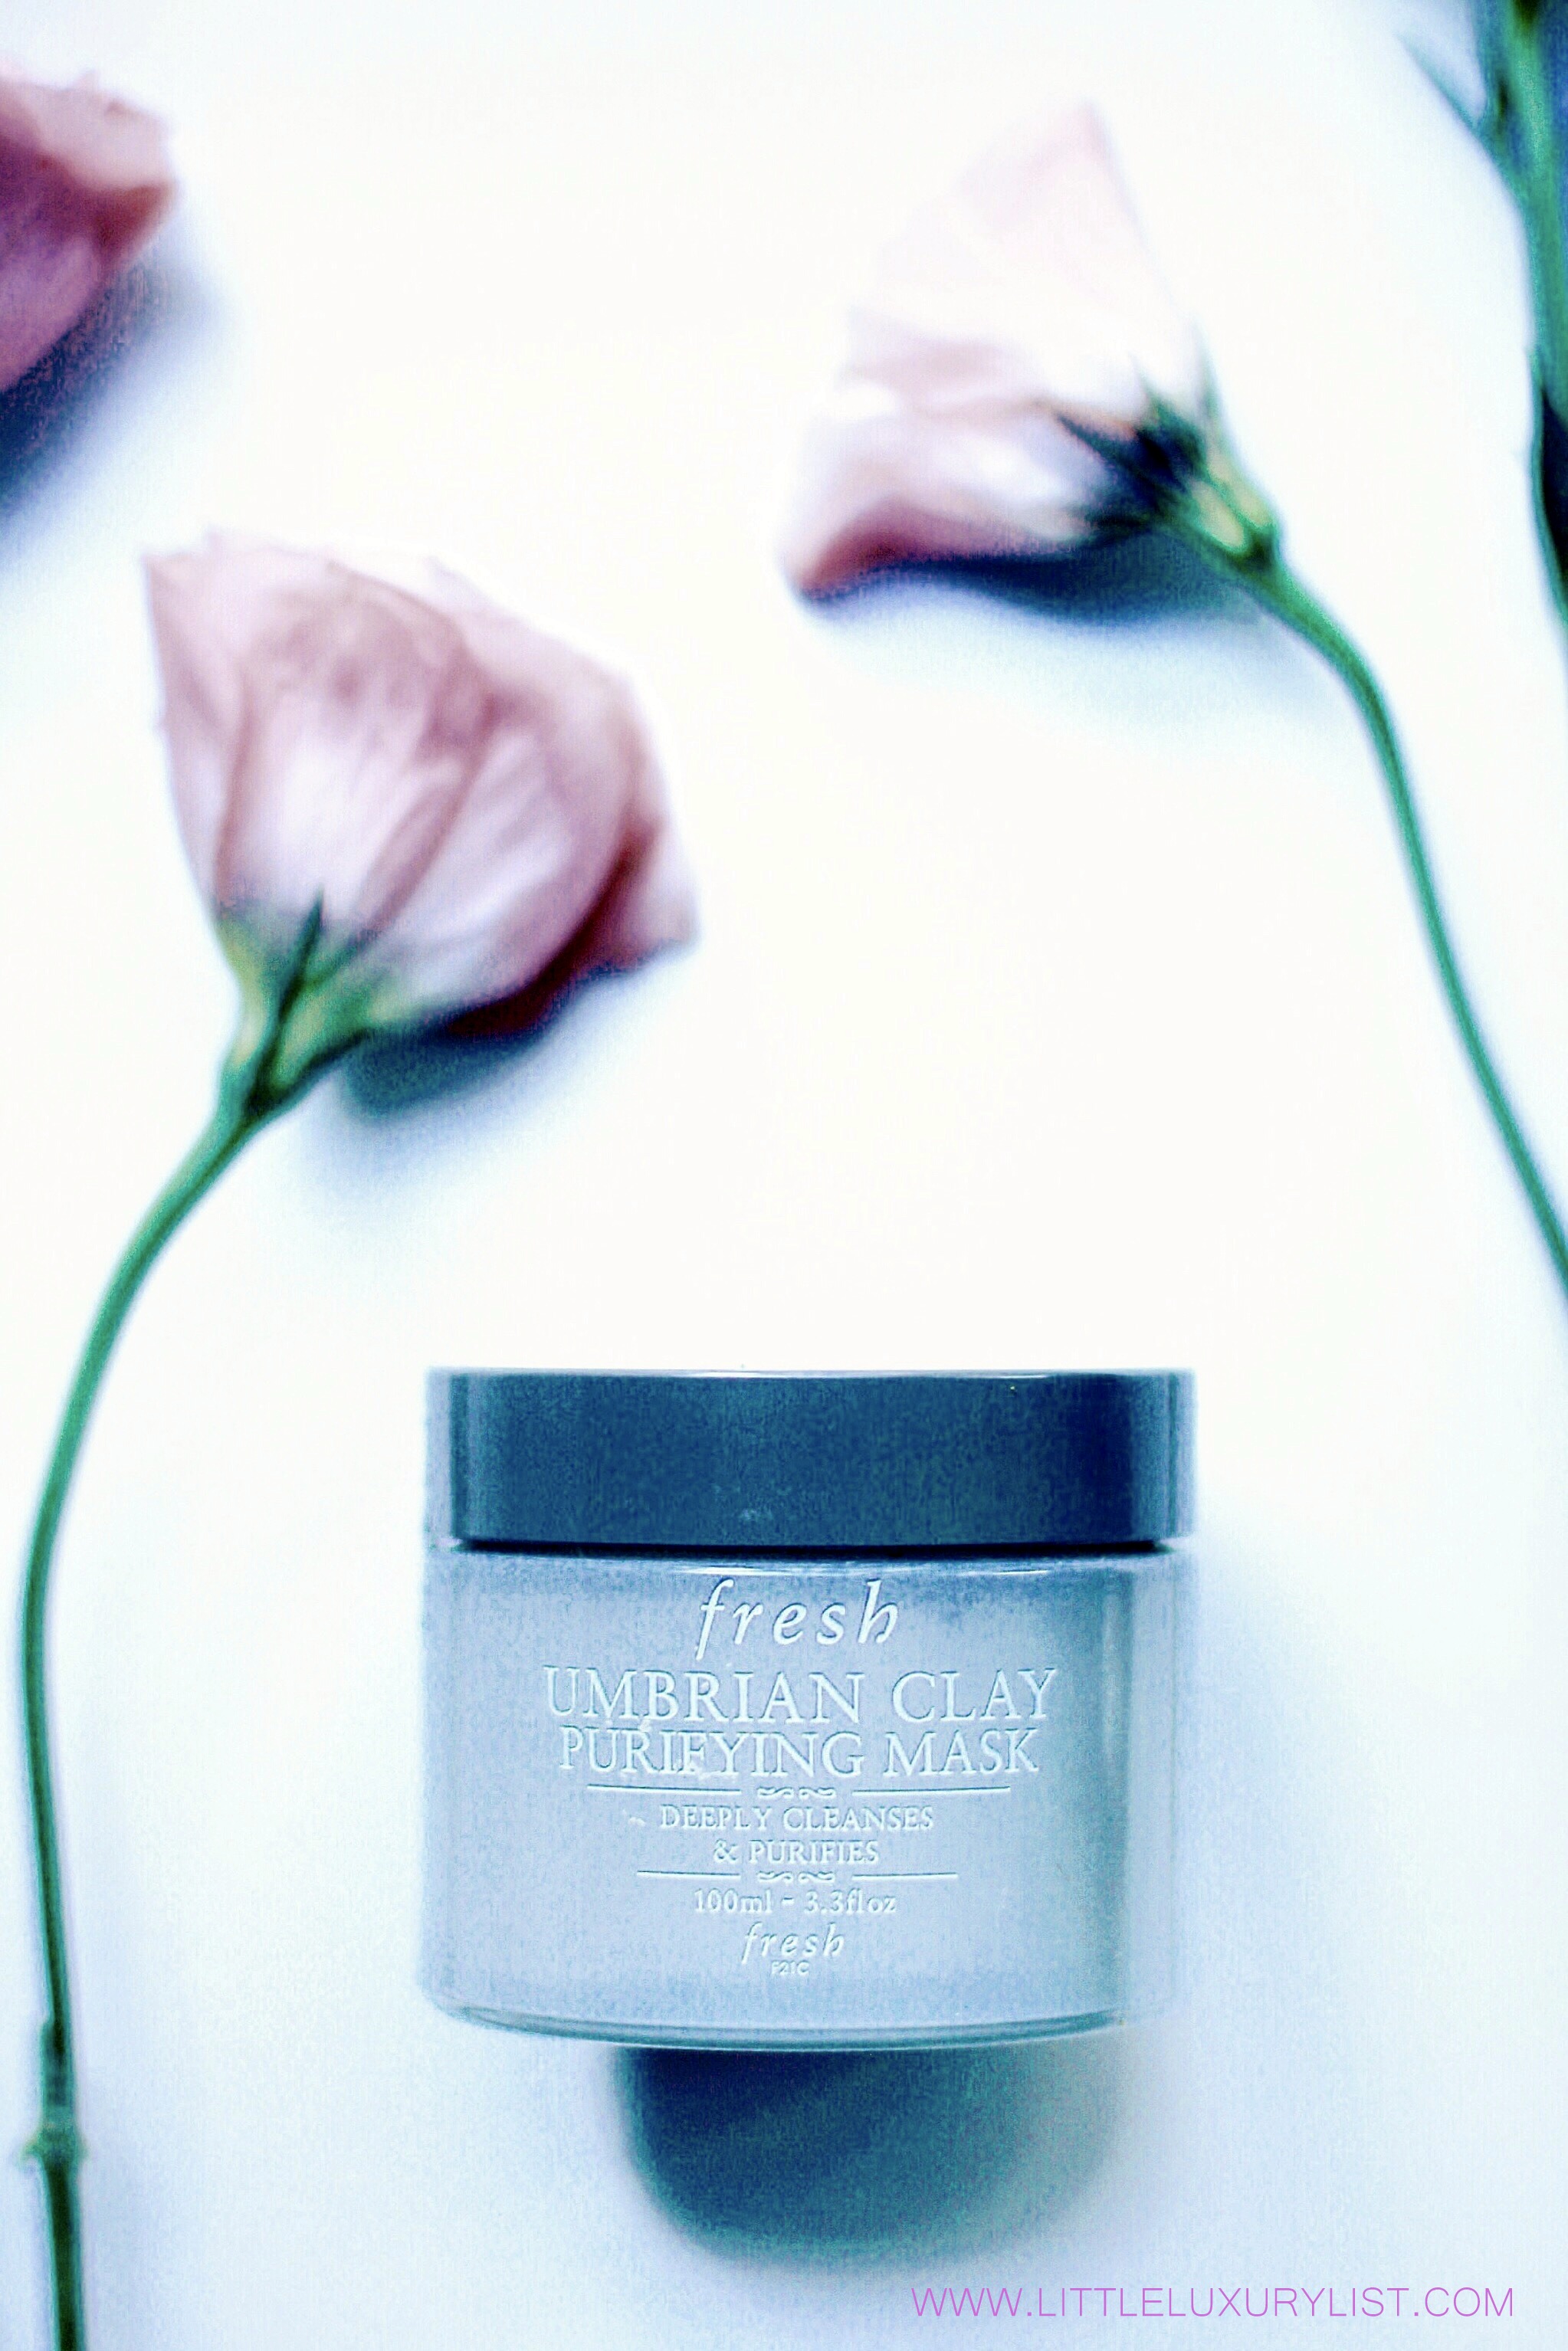 Fresh Umbrian Clay purifying mask with roses